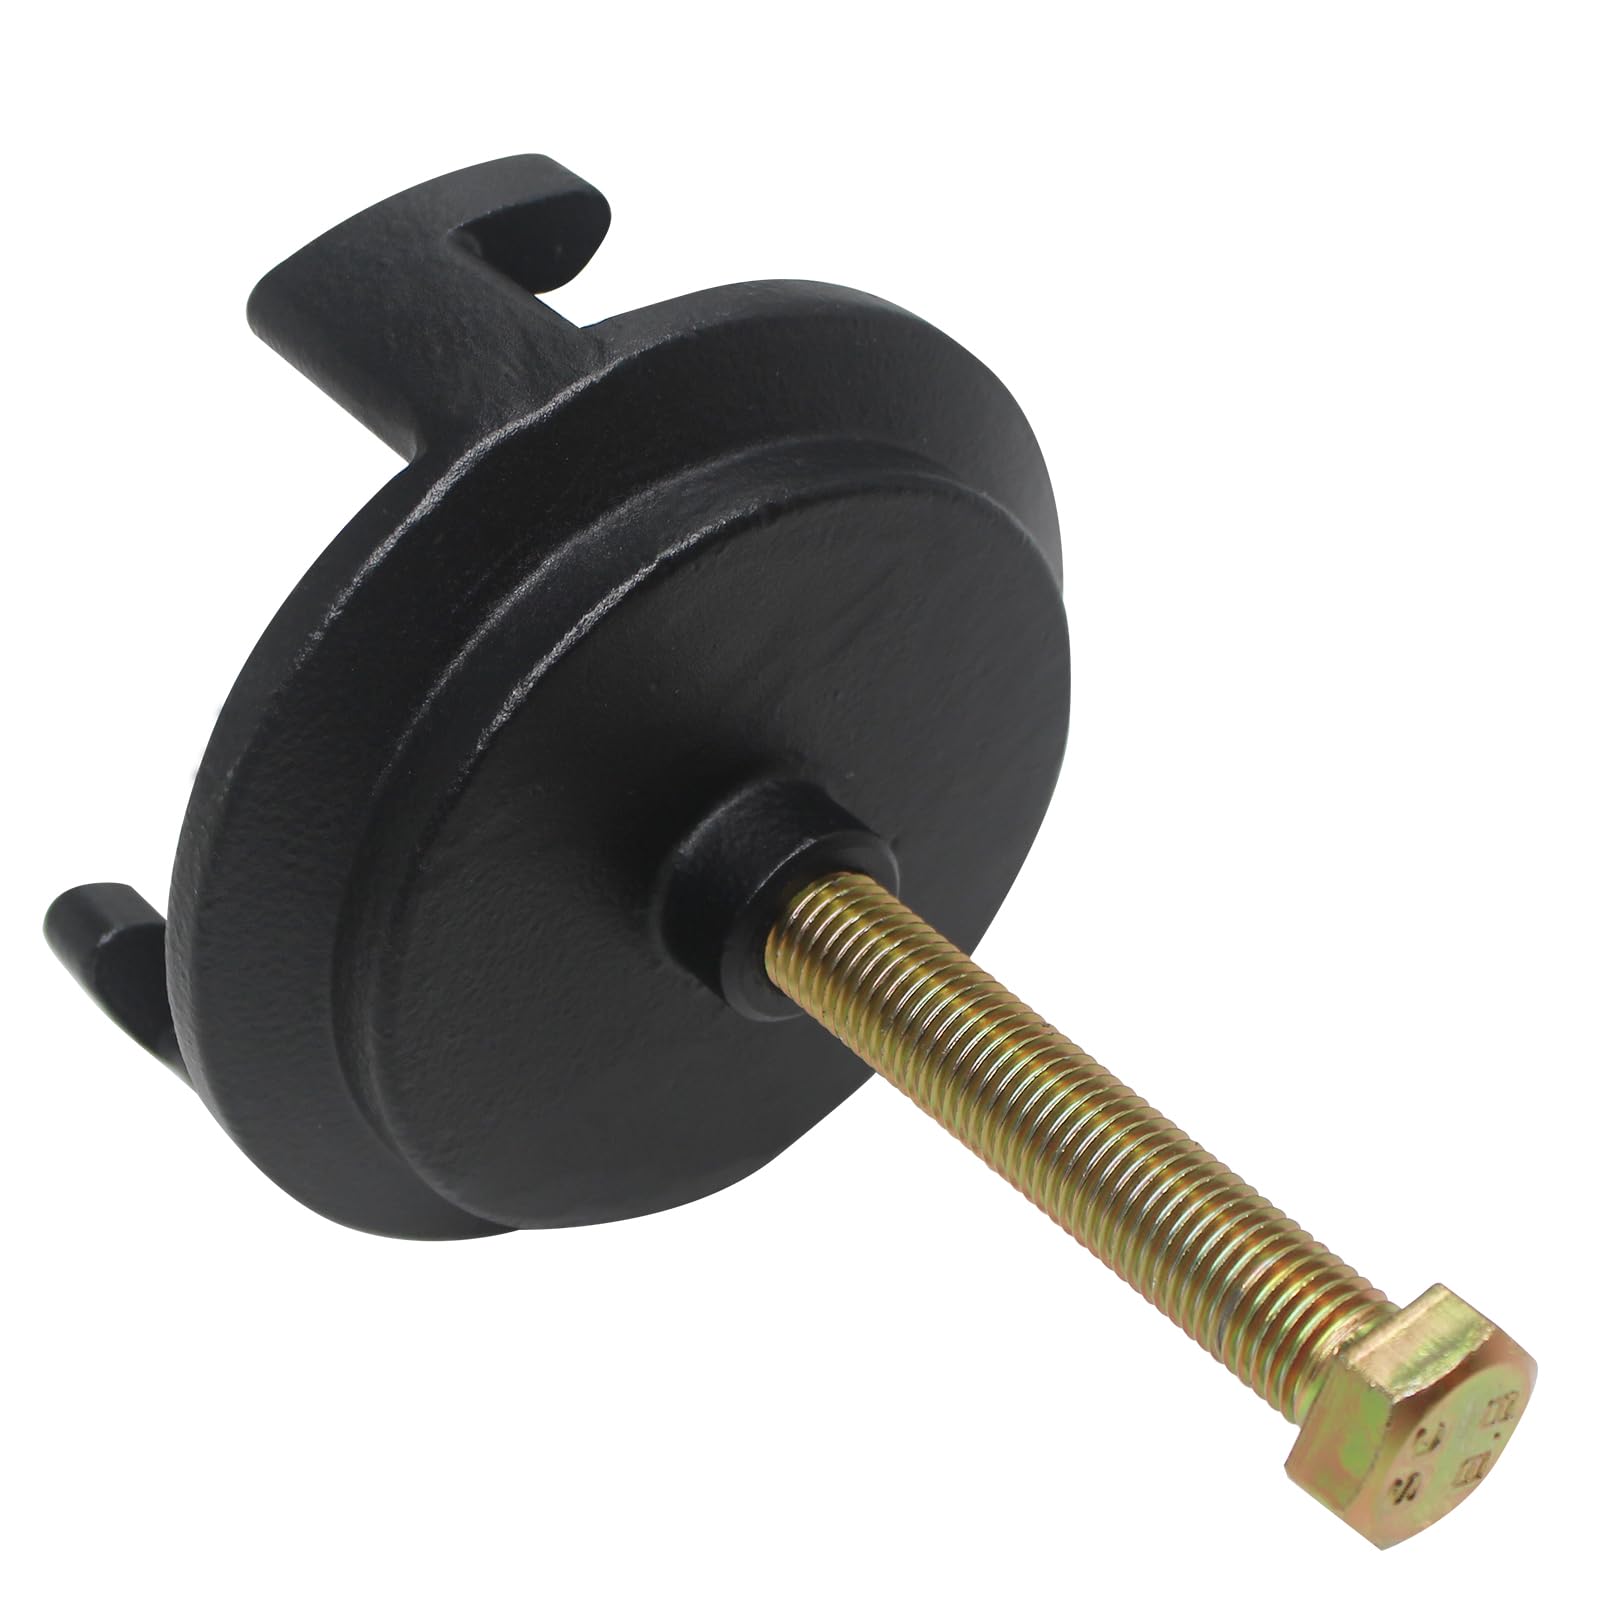 BESTOOL 25264 Harmonic Balancer Puller for GM，LS Crank Pulley Puller for GM, Chrysler, Jeep, Dodge,Removes Harmonic Balancers without Tapped Holes